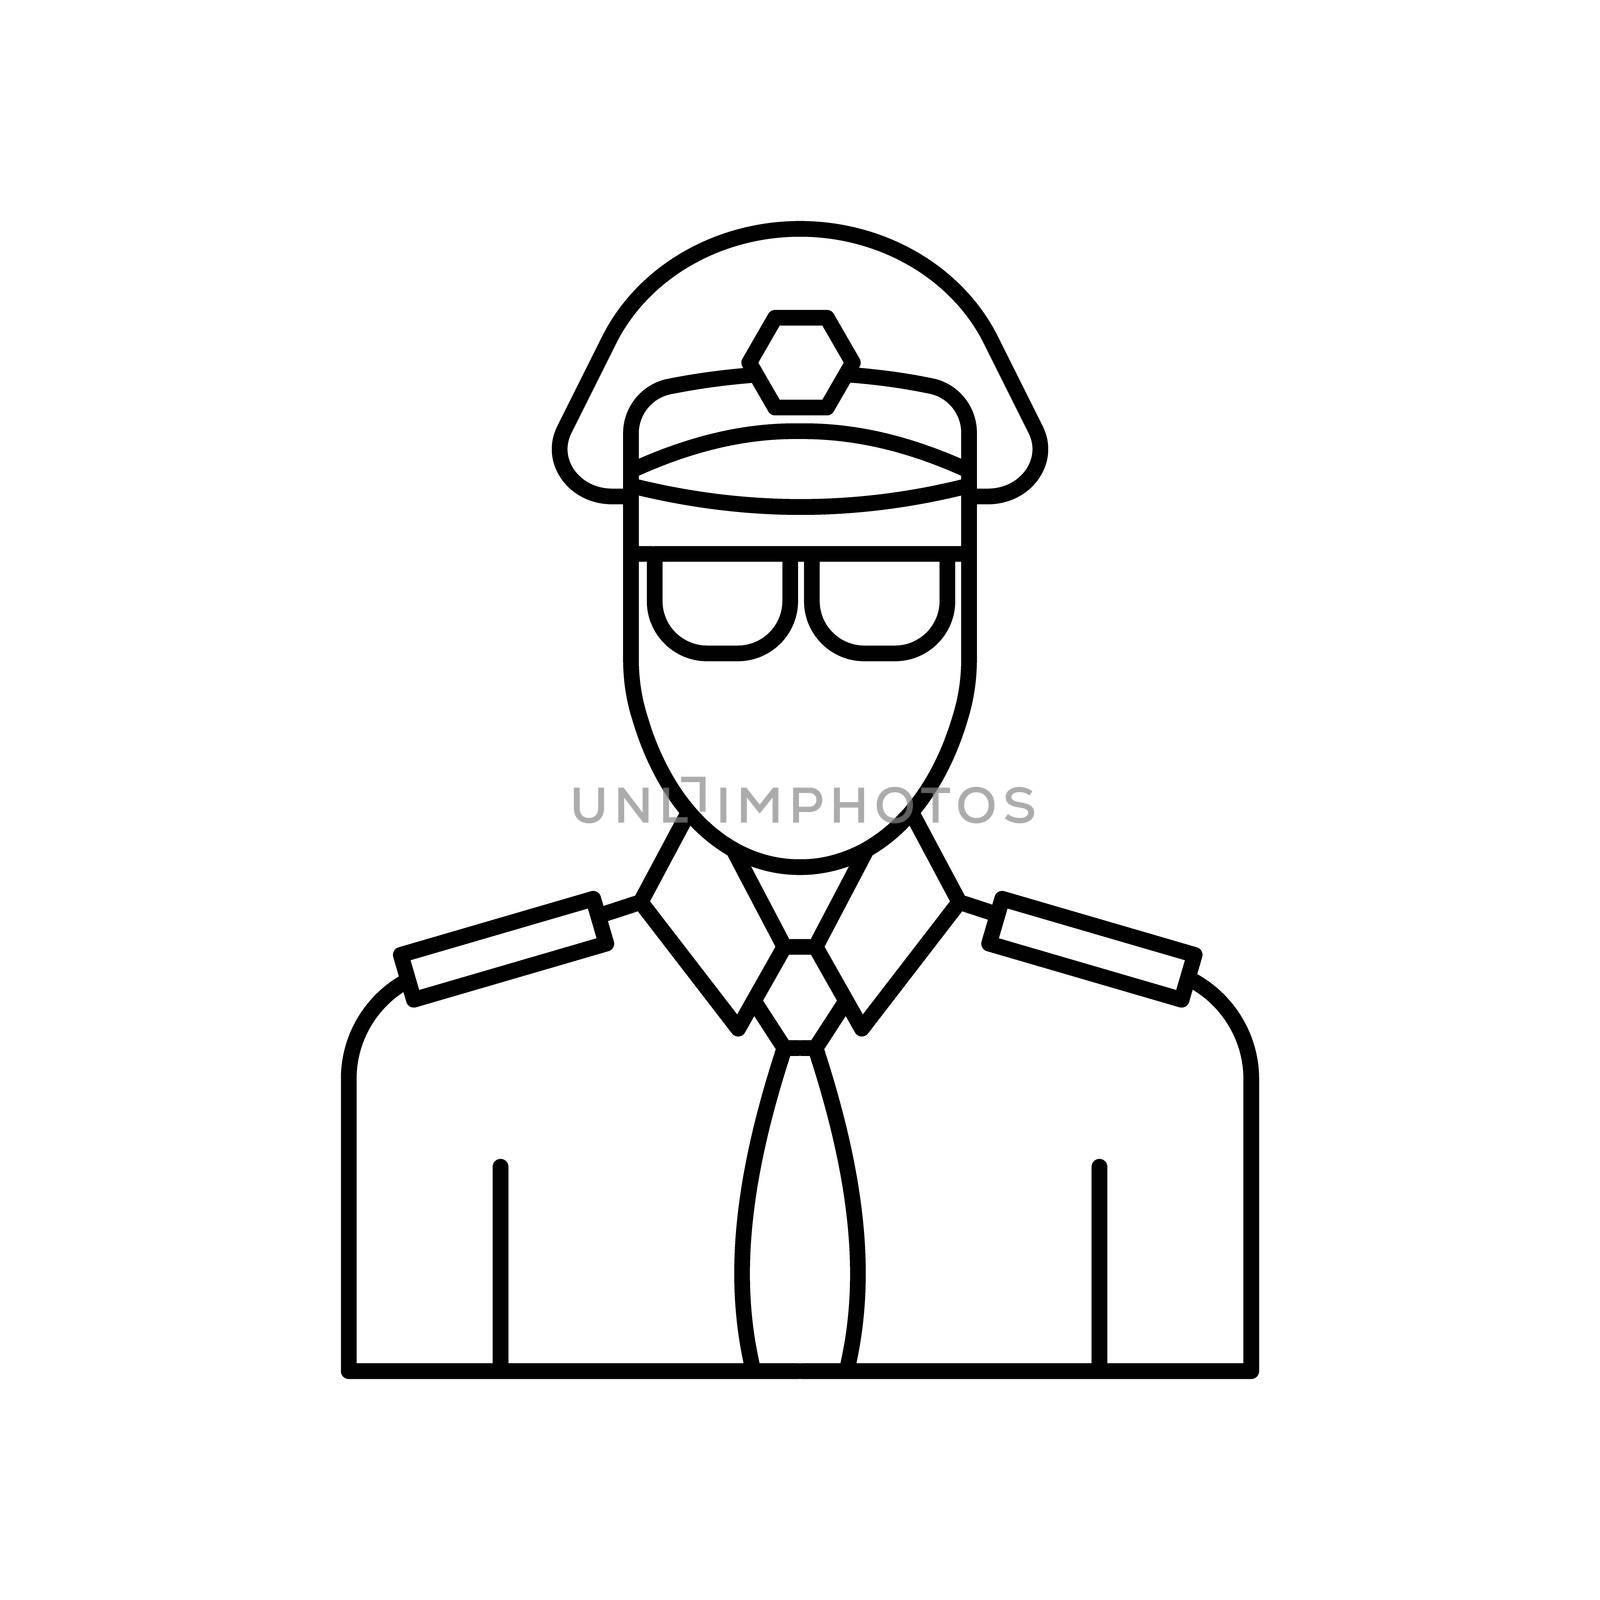 pilot, airport, jobs line icon. elements of airport, travel illustration icons. signs, symbols can be used for web, logo, mobile app, UI, UX on white background